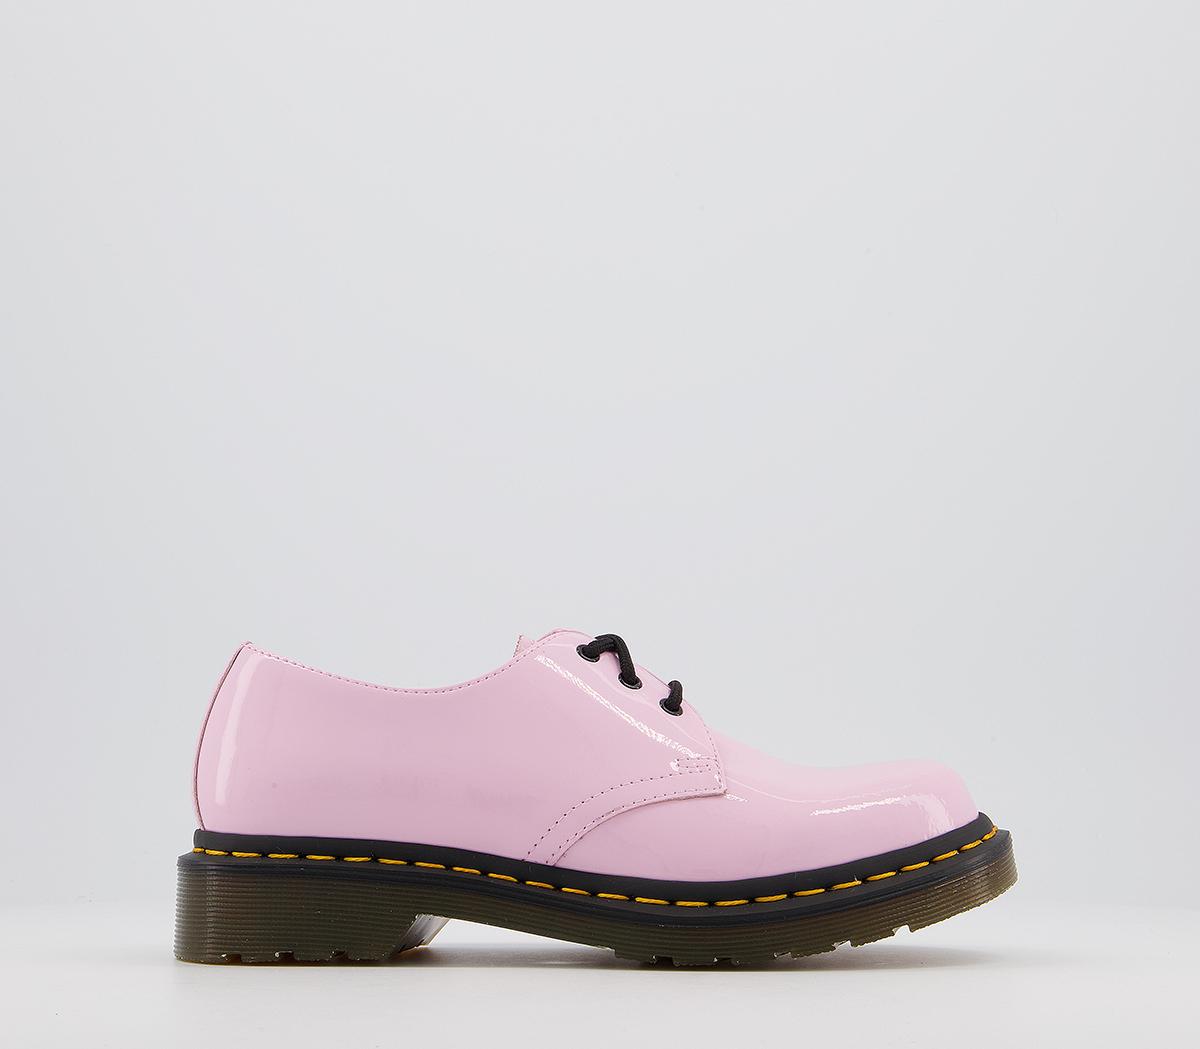 Dr. Martens1461 3 Eye ShoesPale Pink Patent